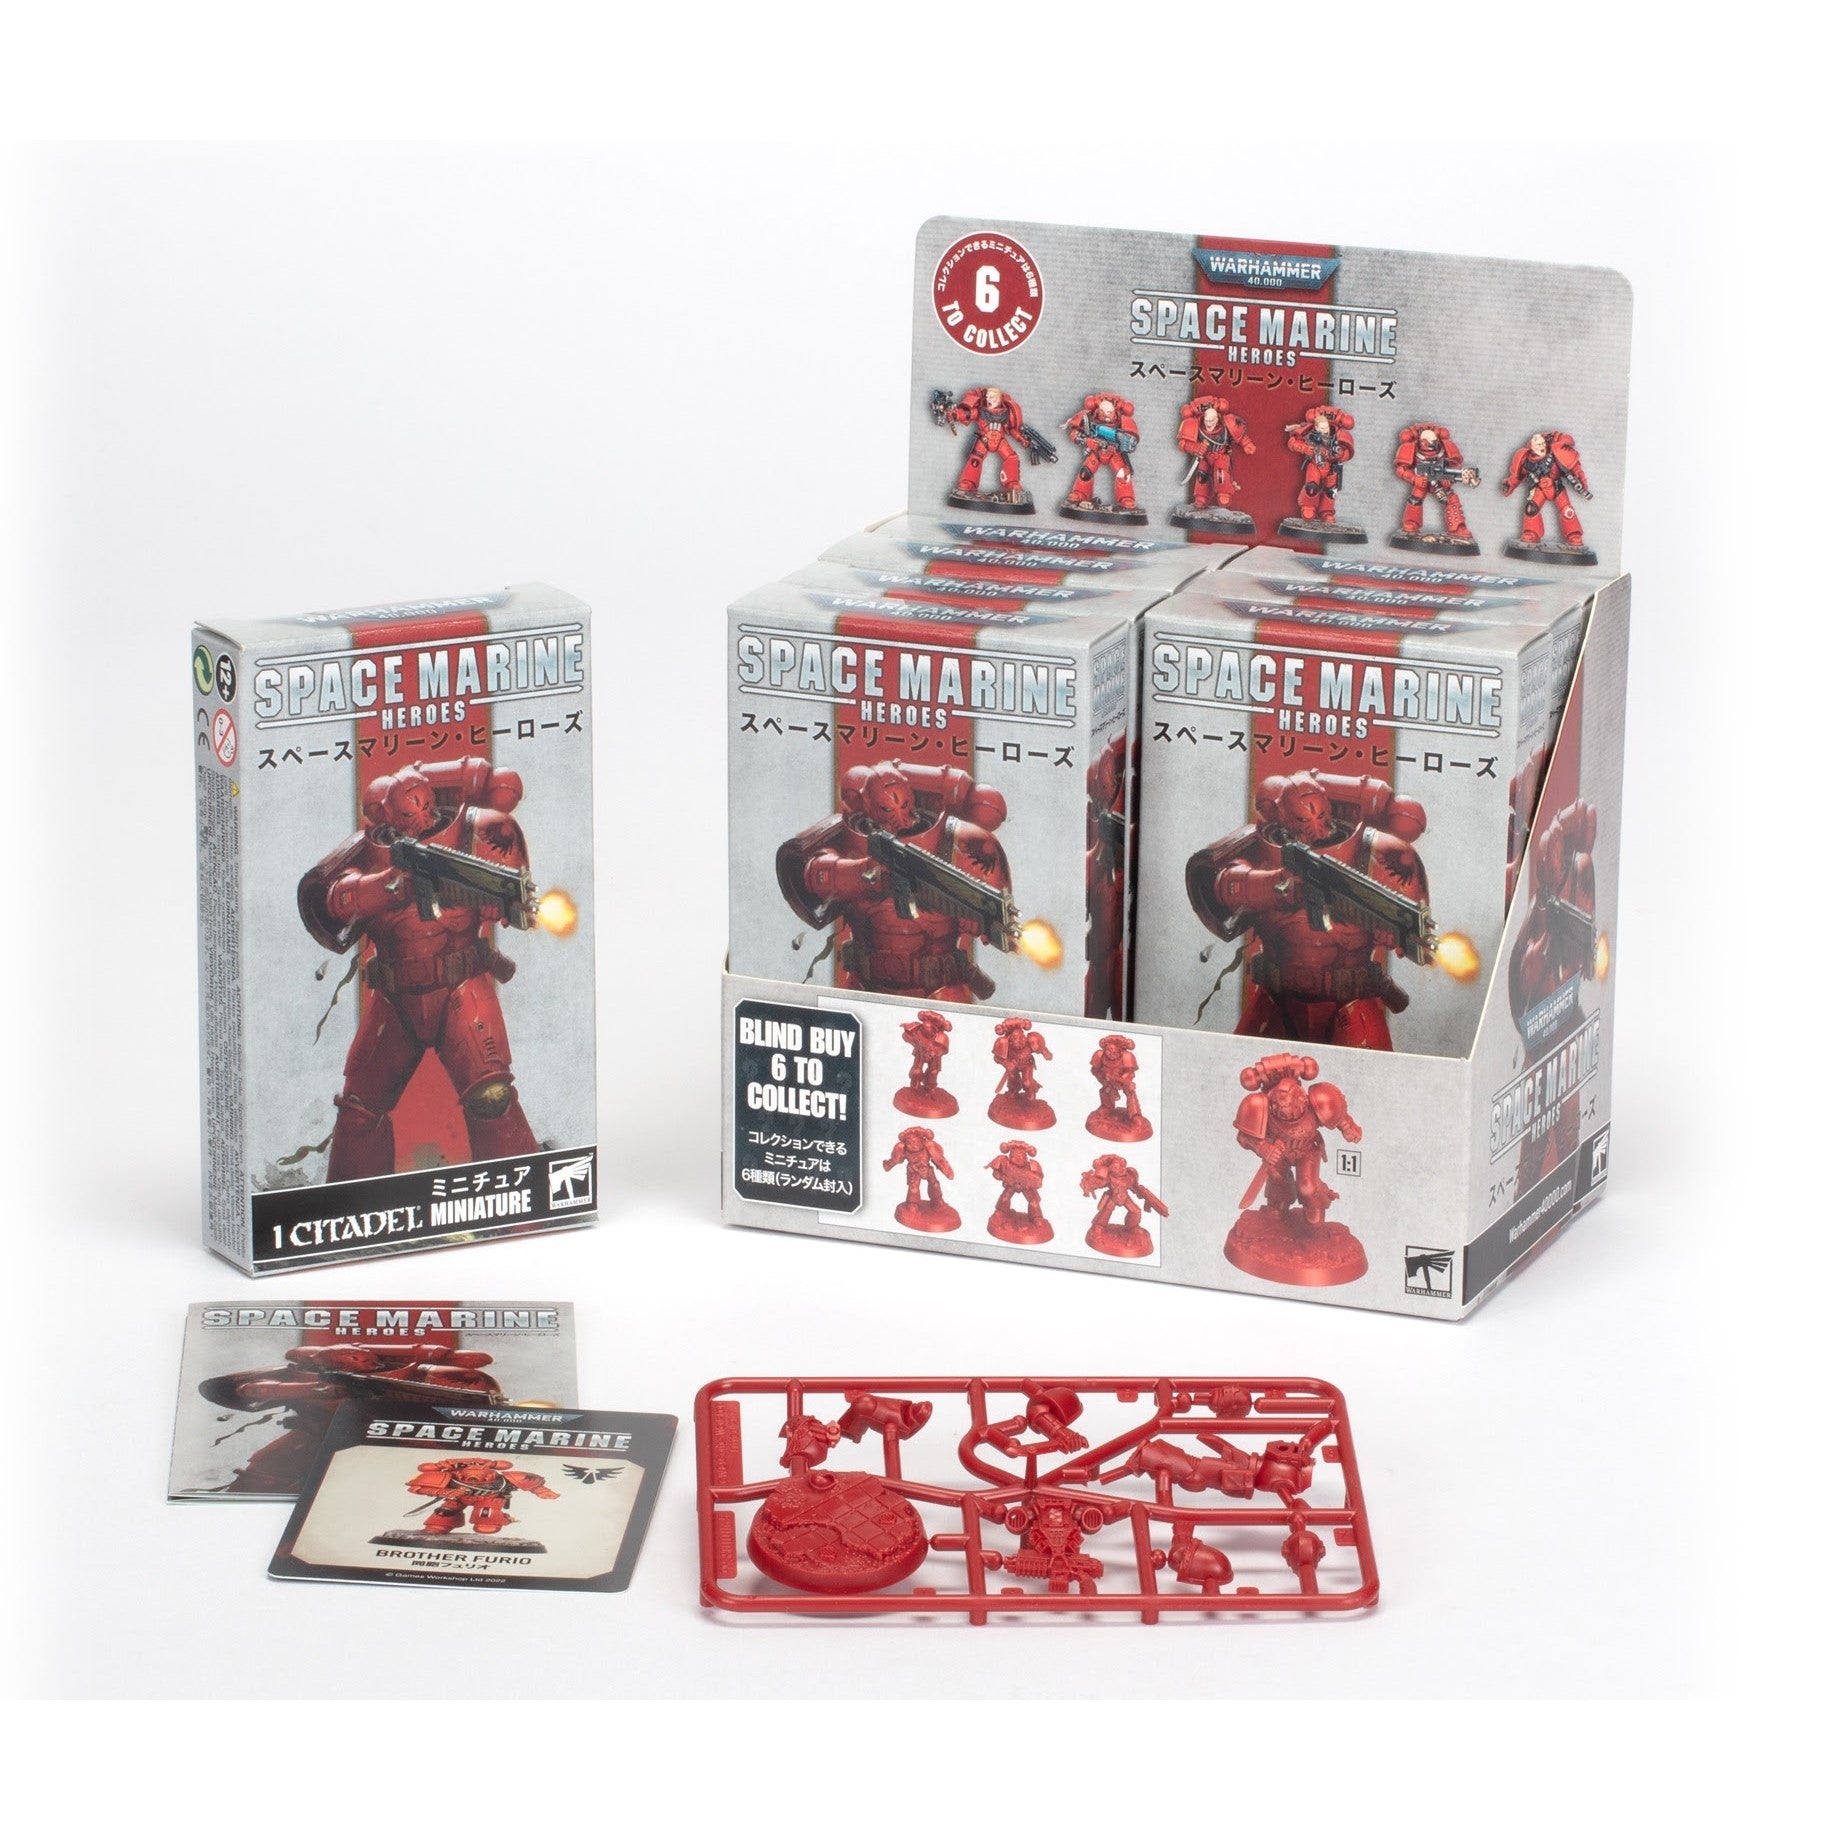 Warhammer Space Marine Heroes Series 4 Display - Blood Angels Collection Two